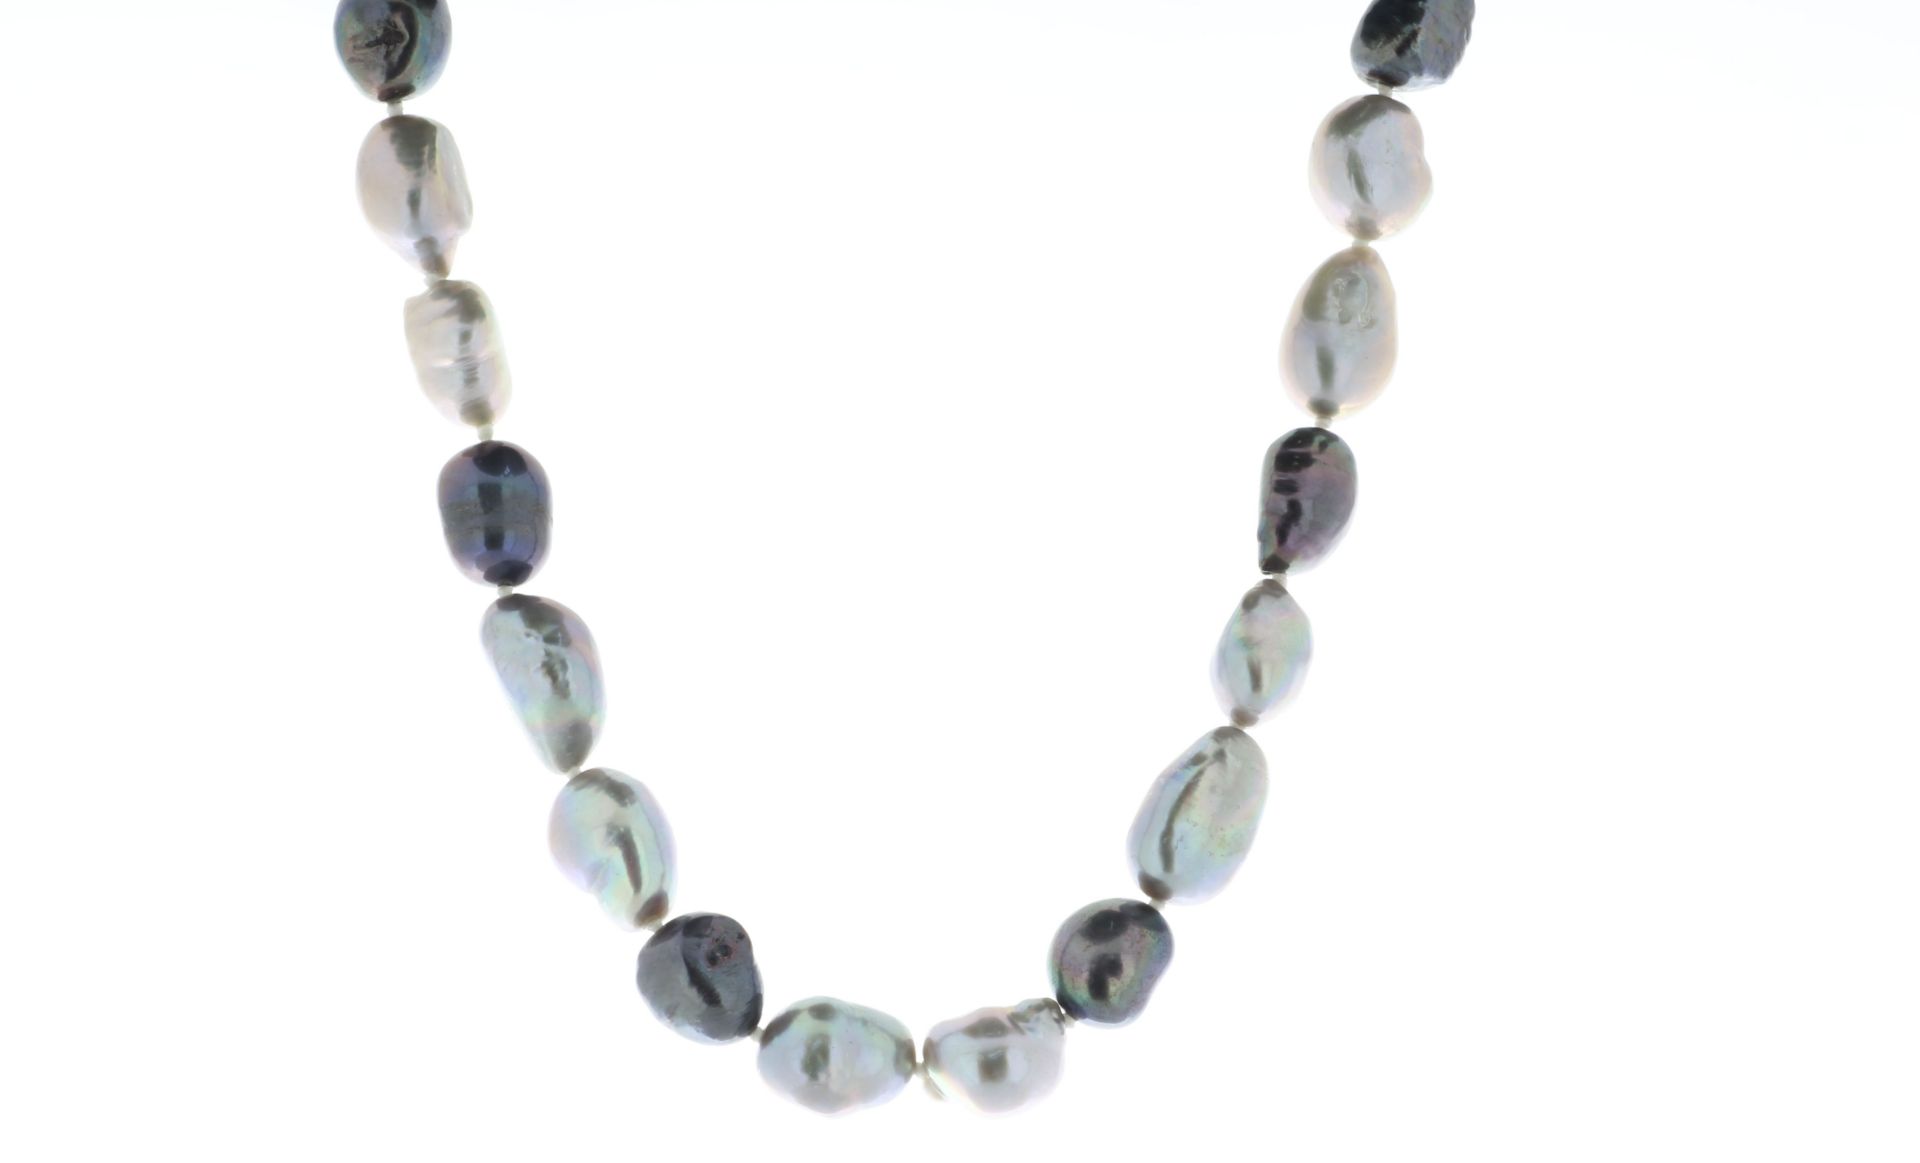 26 Inch Freshwater Baroque Shaped Cultured 7.5 - 8.0mm Pearl Necklace - Valued By AGI £325.00 -